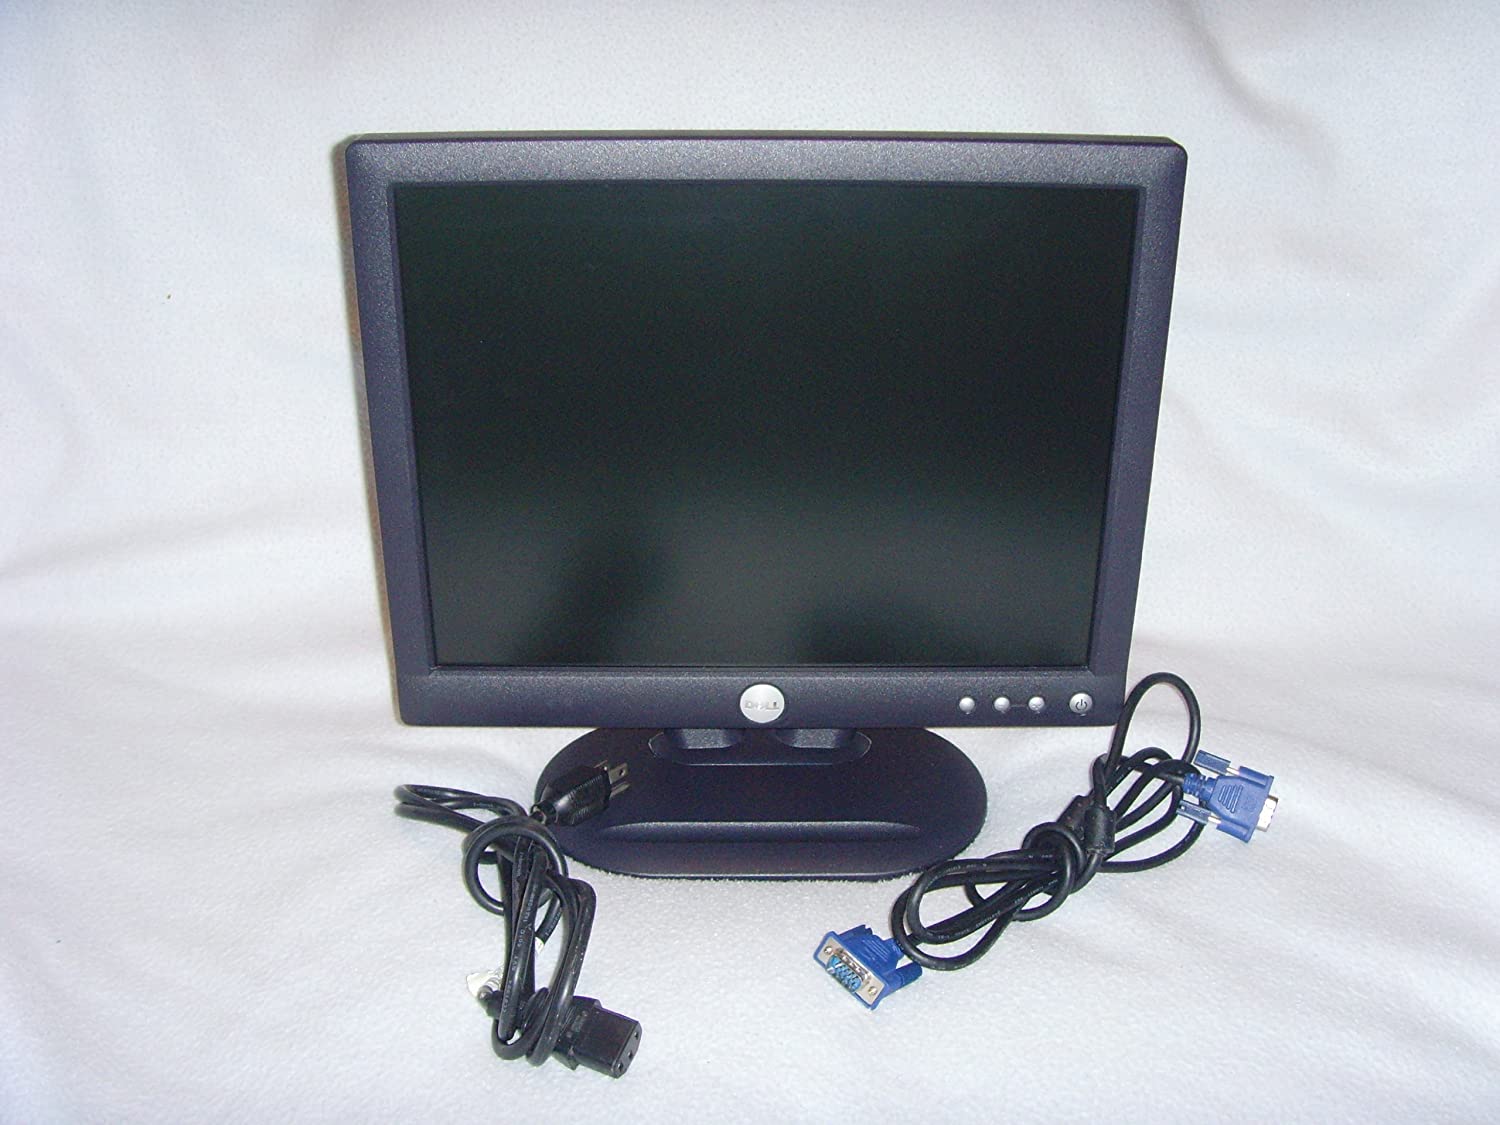 Nch 15 Dell Minitor ( 17 Nch Monitor)